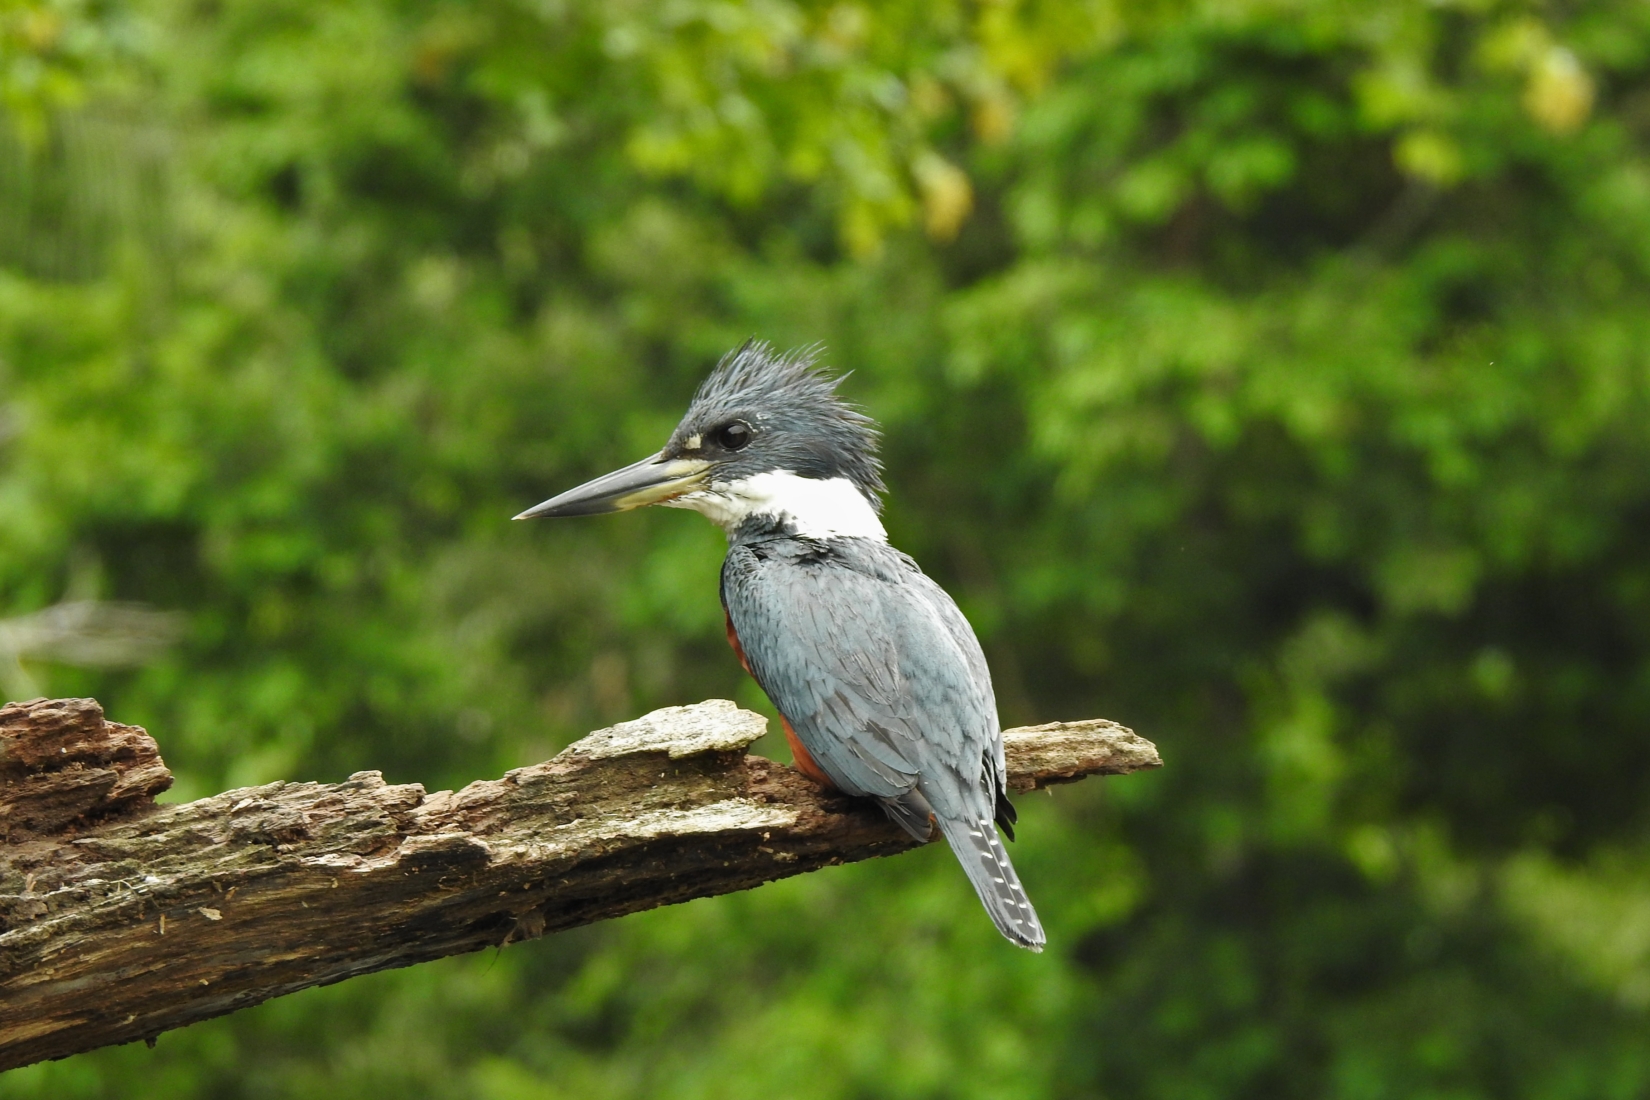 Ringed Kingfisher perched on a piece of wood in Tortuguero Forest, Costa Rica